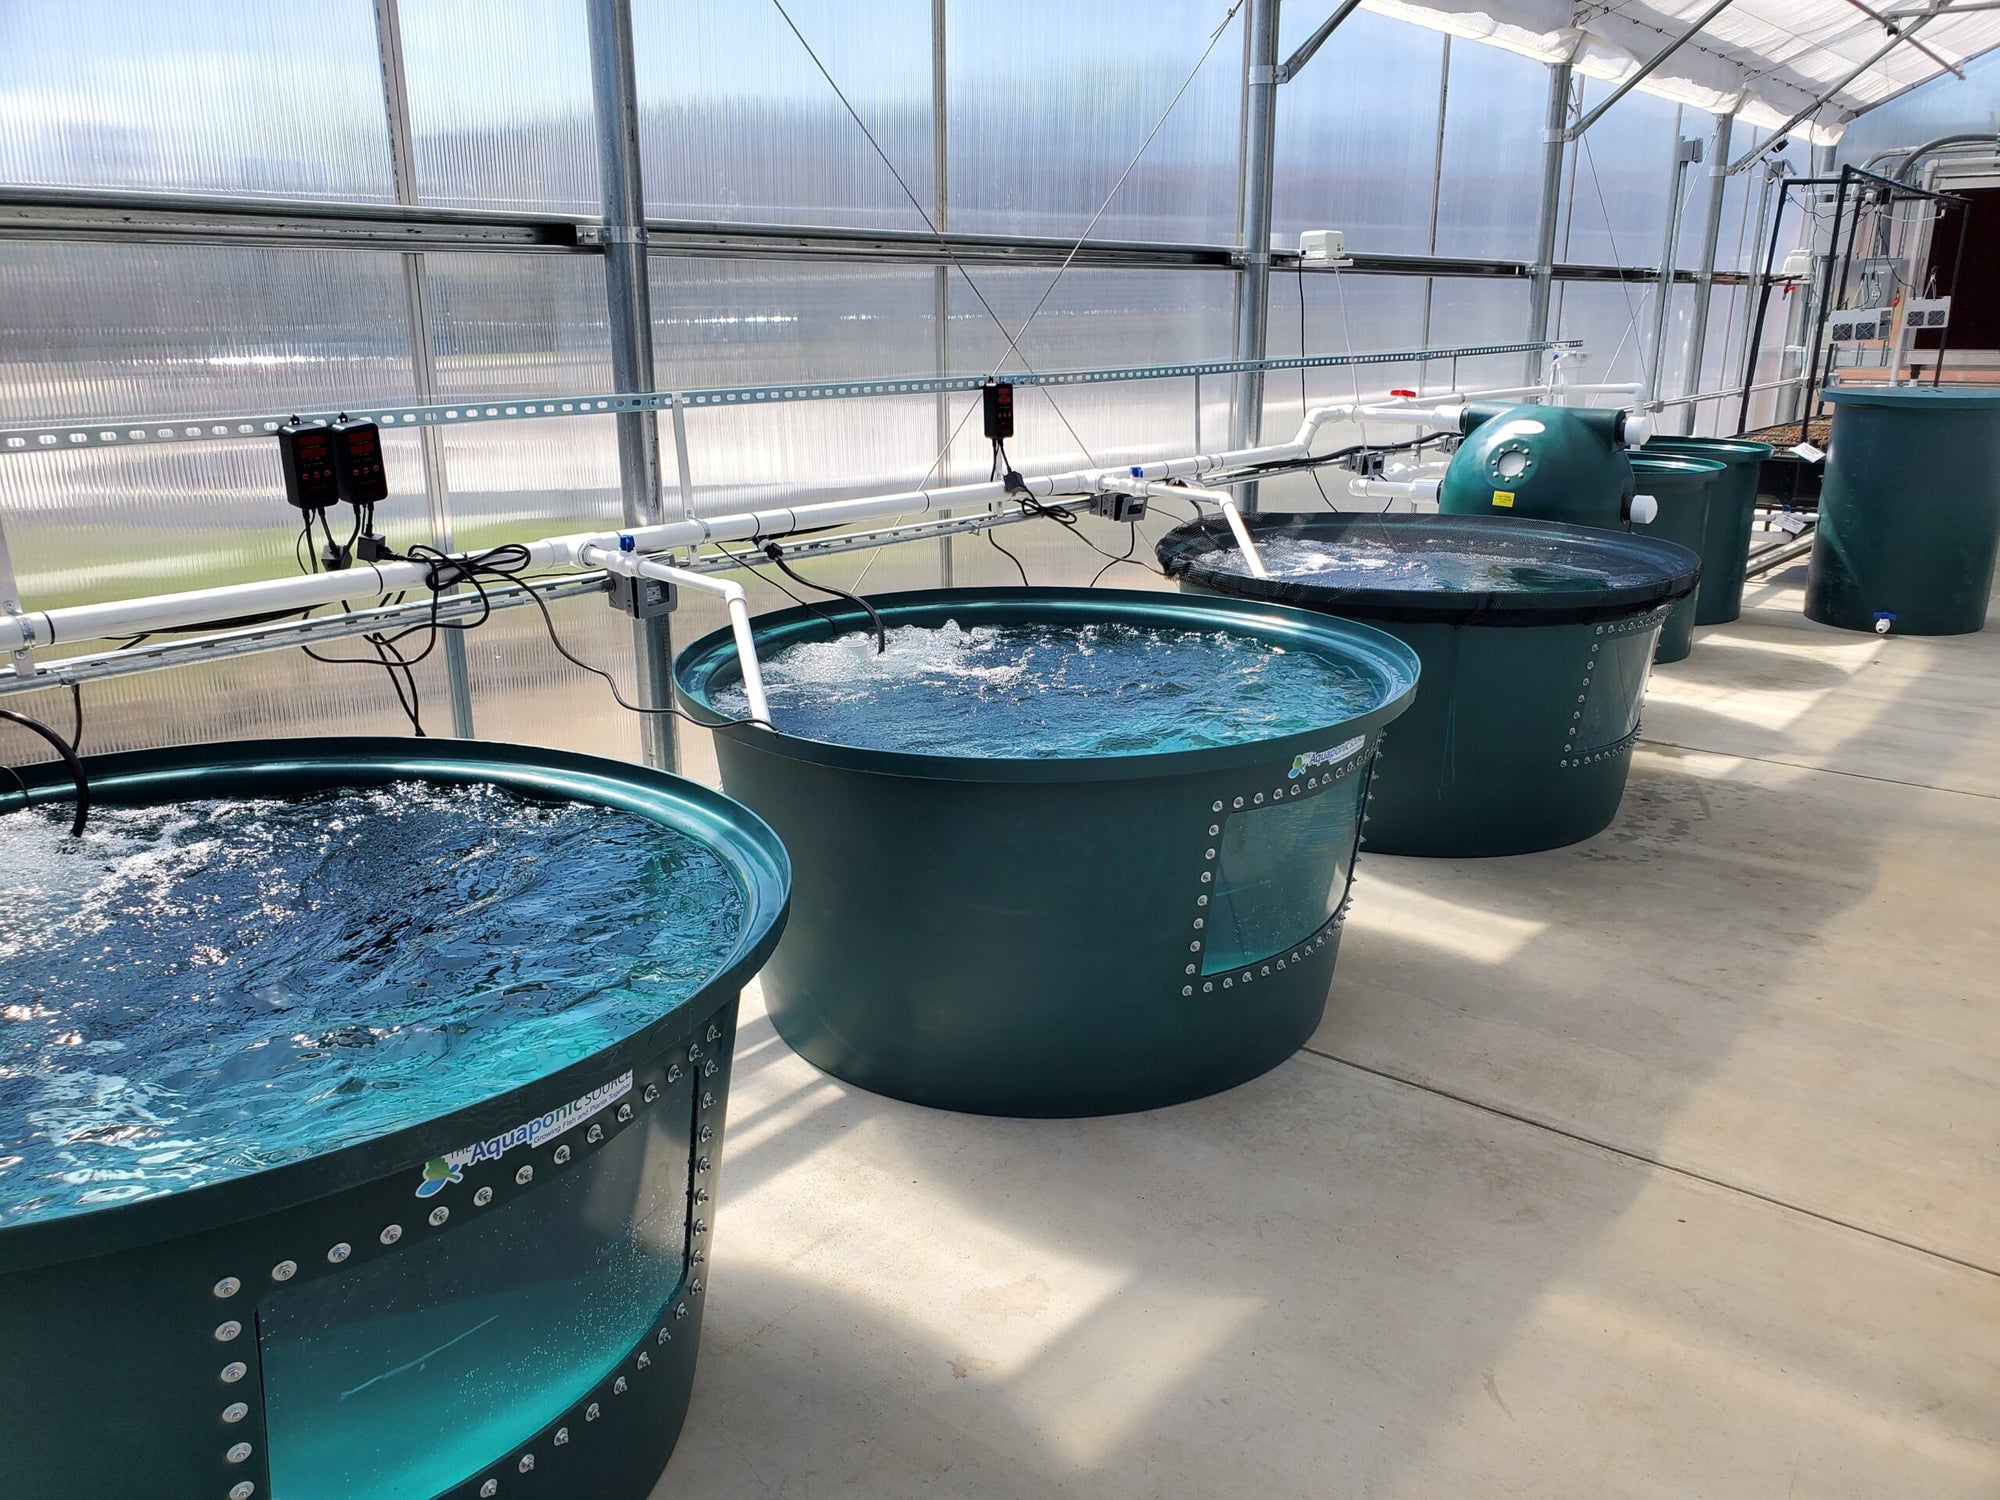 Aquaponics tanks in a greenhouse with water in them, equipped with TAS Fish Tank Window Kit XL for monitoring fish health.